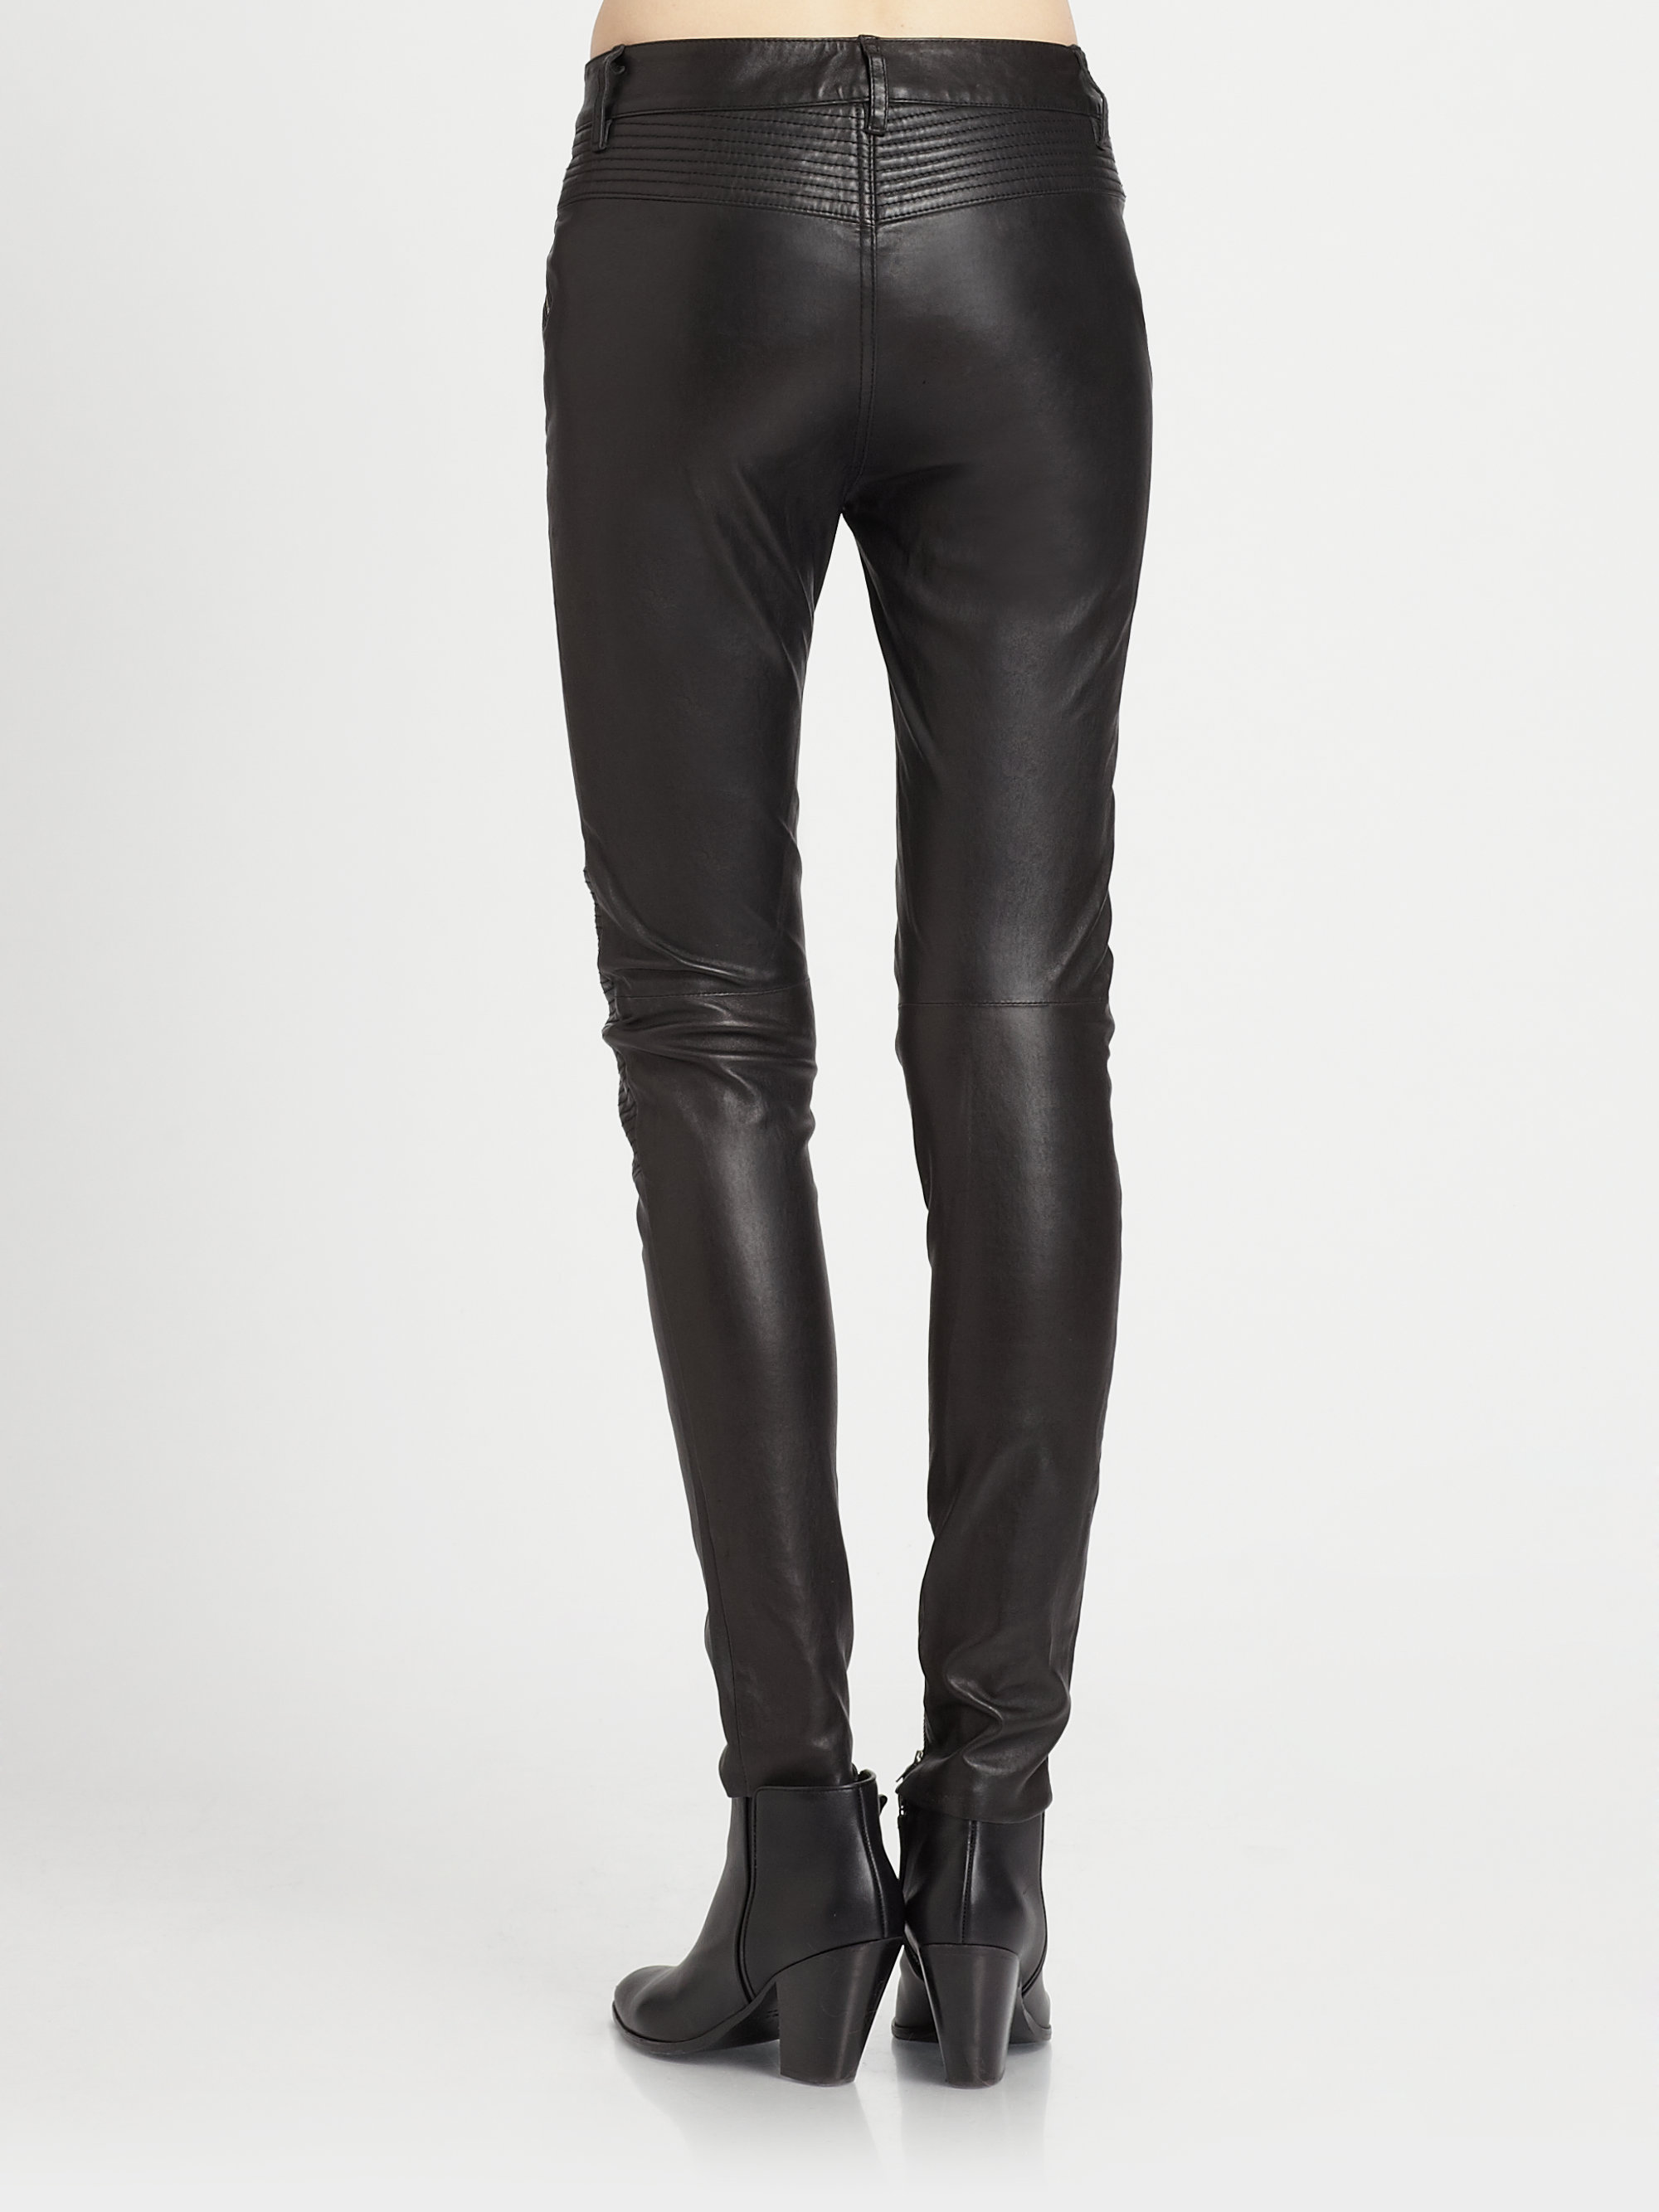 Lyst - Blk Dnm Stretch Leather Pants in Black